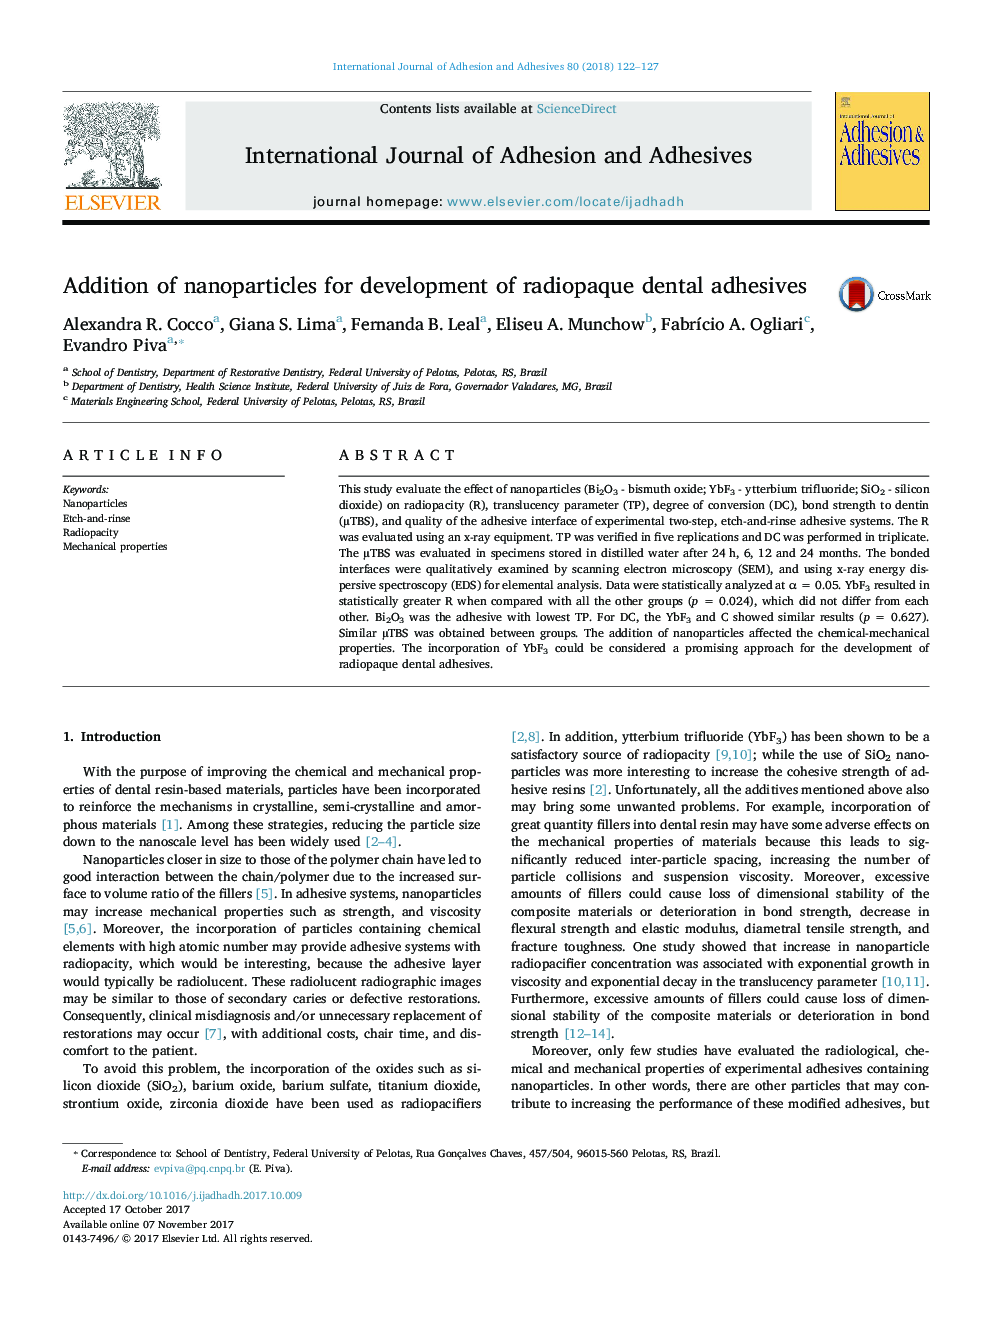 Addition of nanoparticles for development of radiopaque dental adhesives